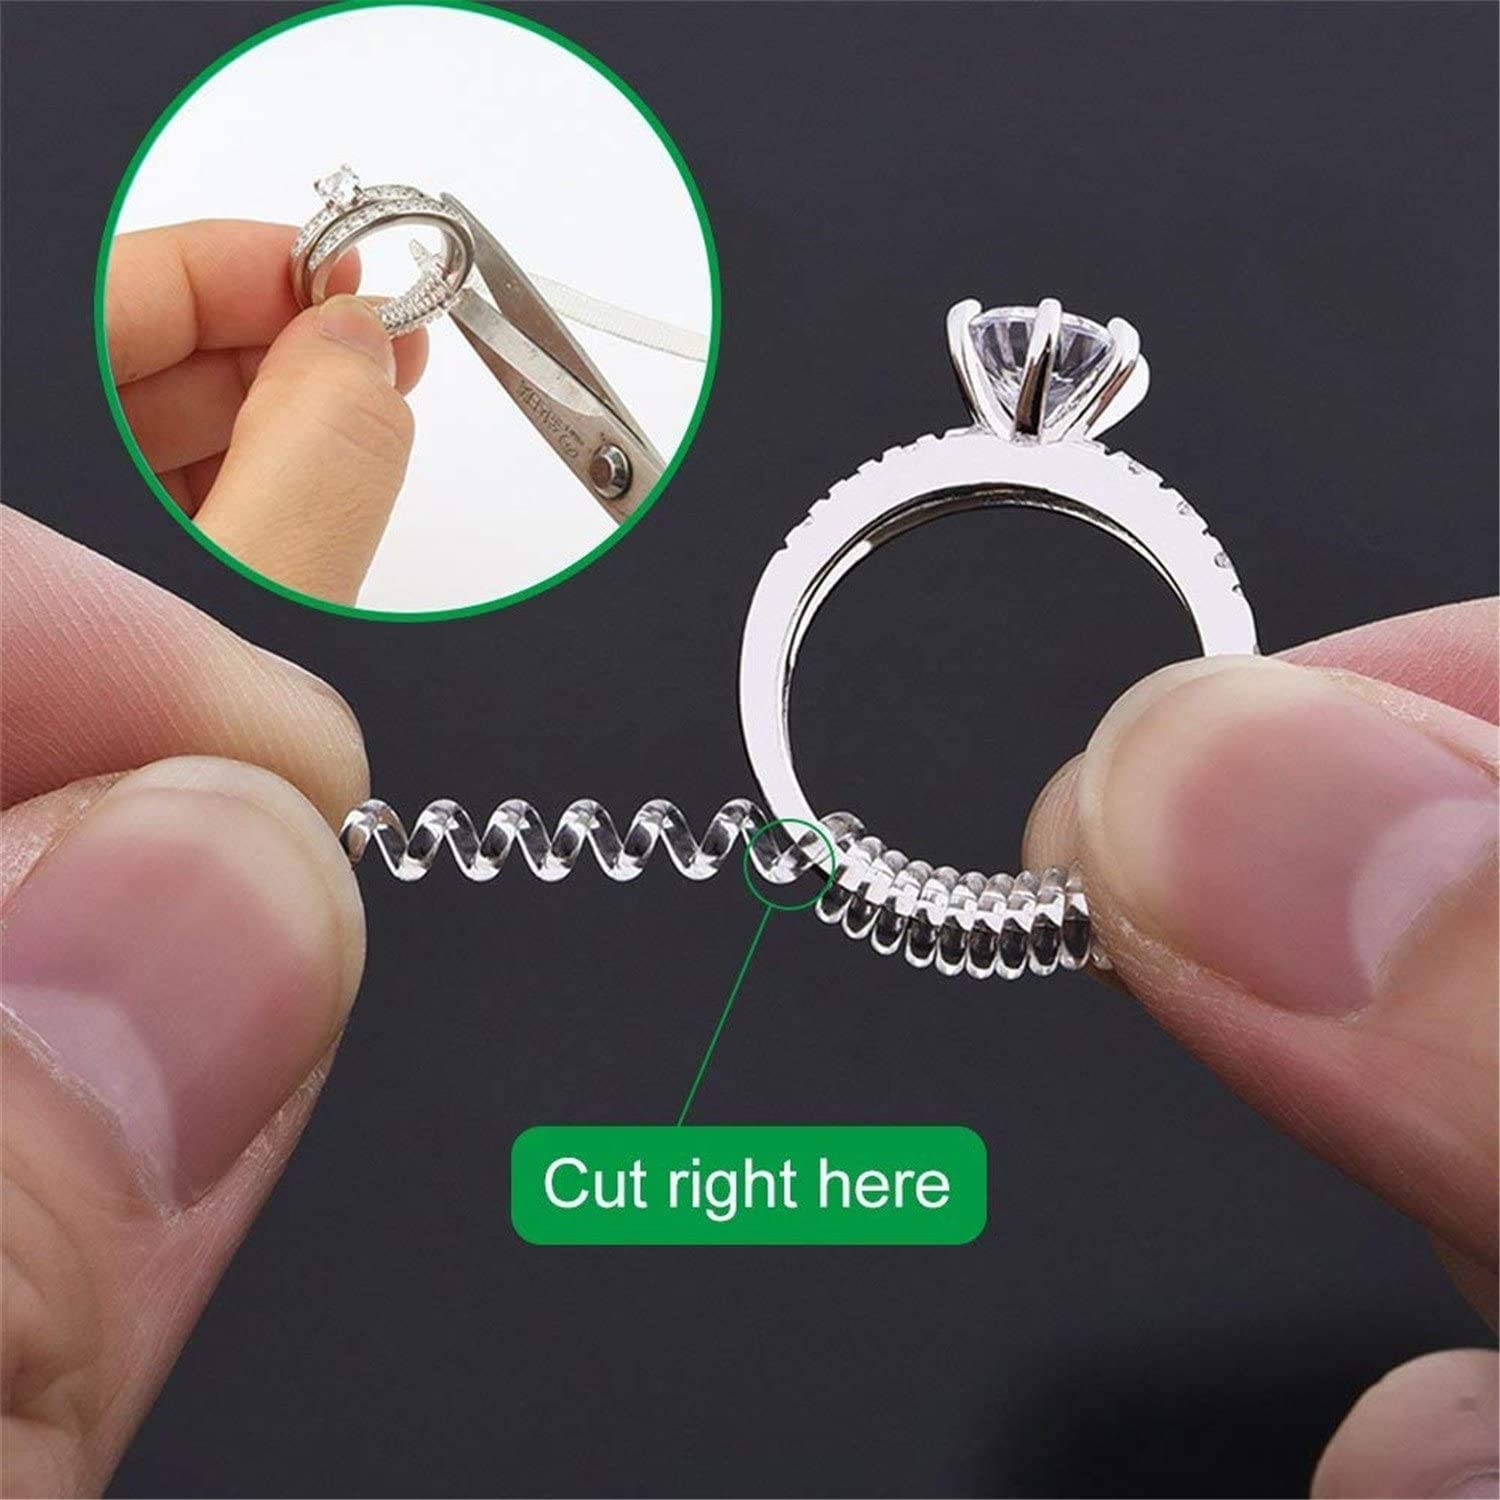 Sozzumi Men's and Women's Ring Adjuster for Loose Rings, Invisible Spiral Ring, Reusable Ring Size Adjuster - Fits Almost Any Rings (4 models)